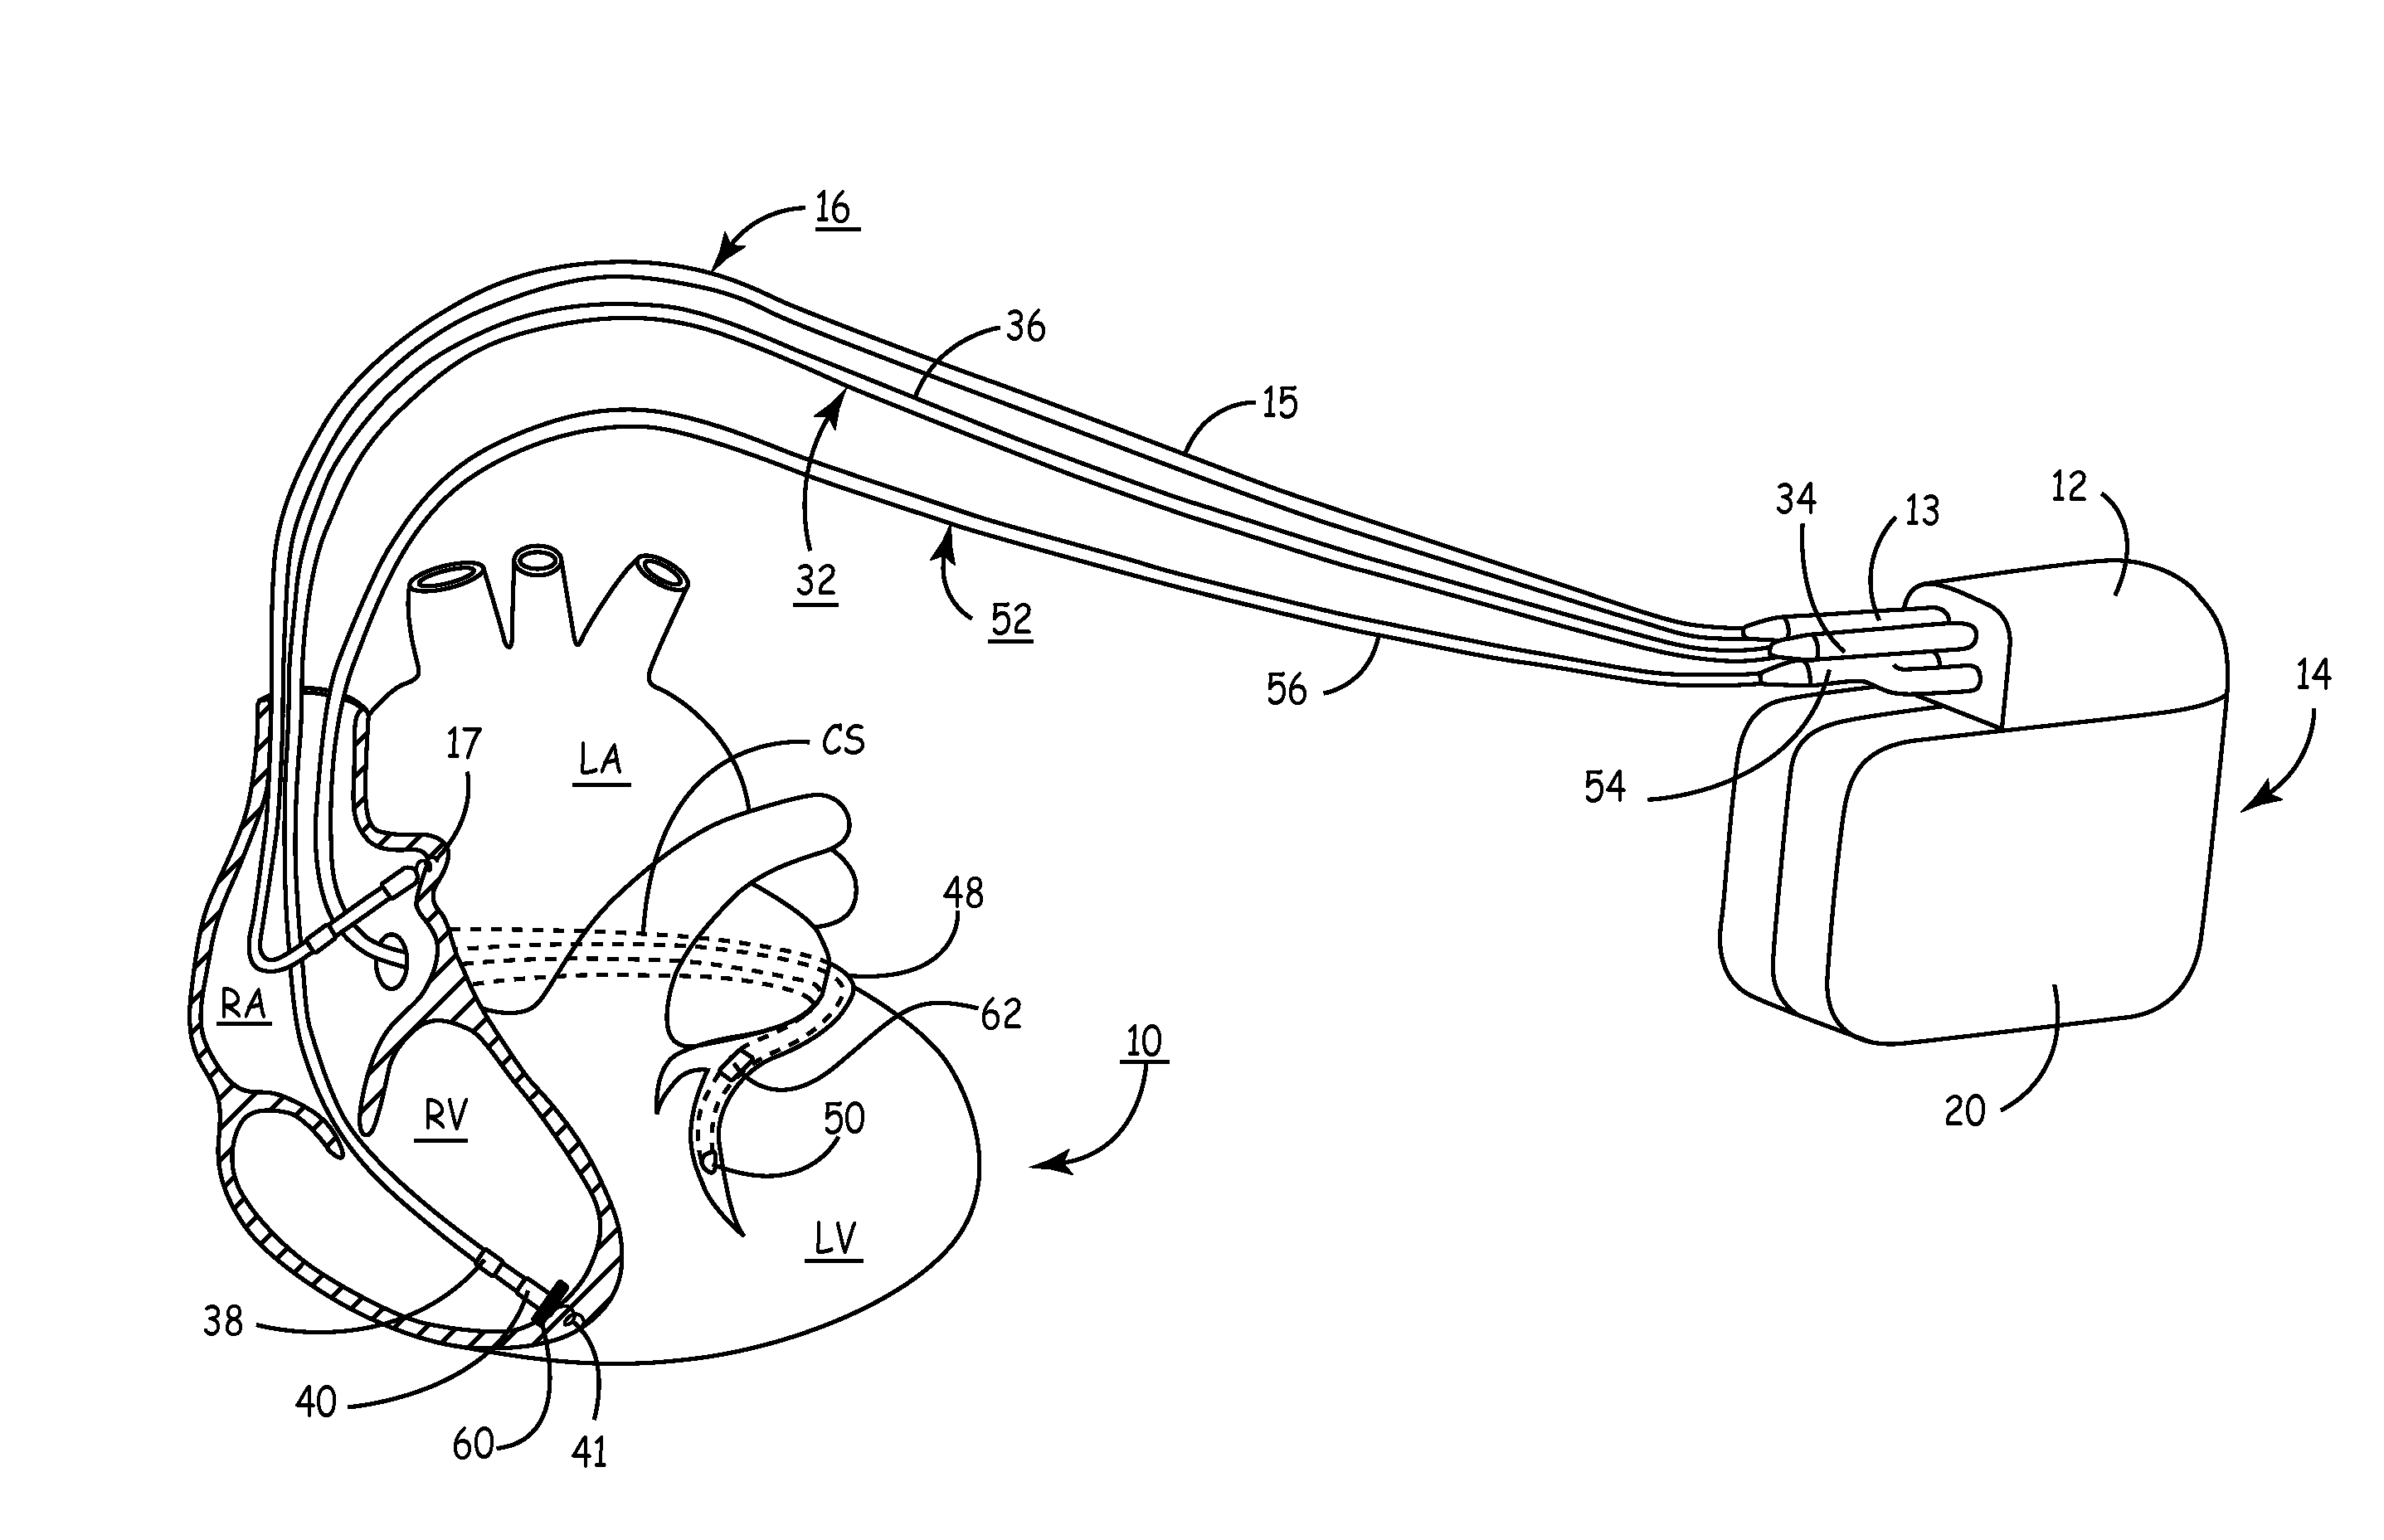 System and method for conditional biventricular pacing